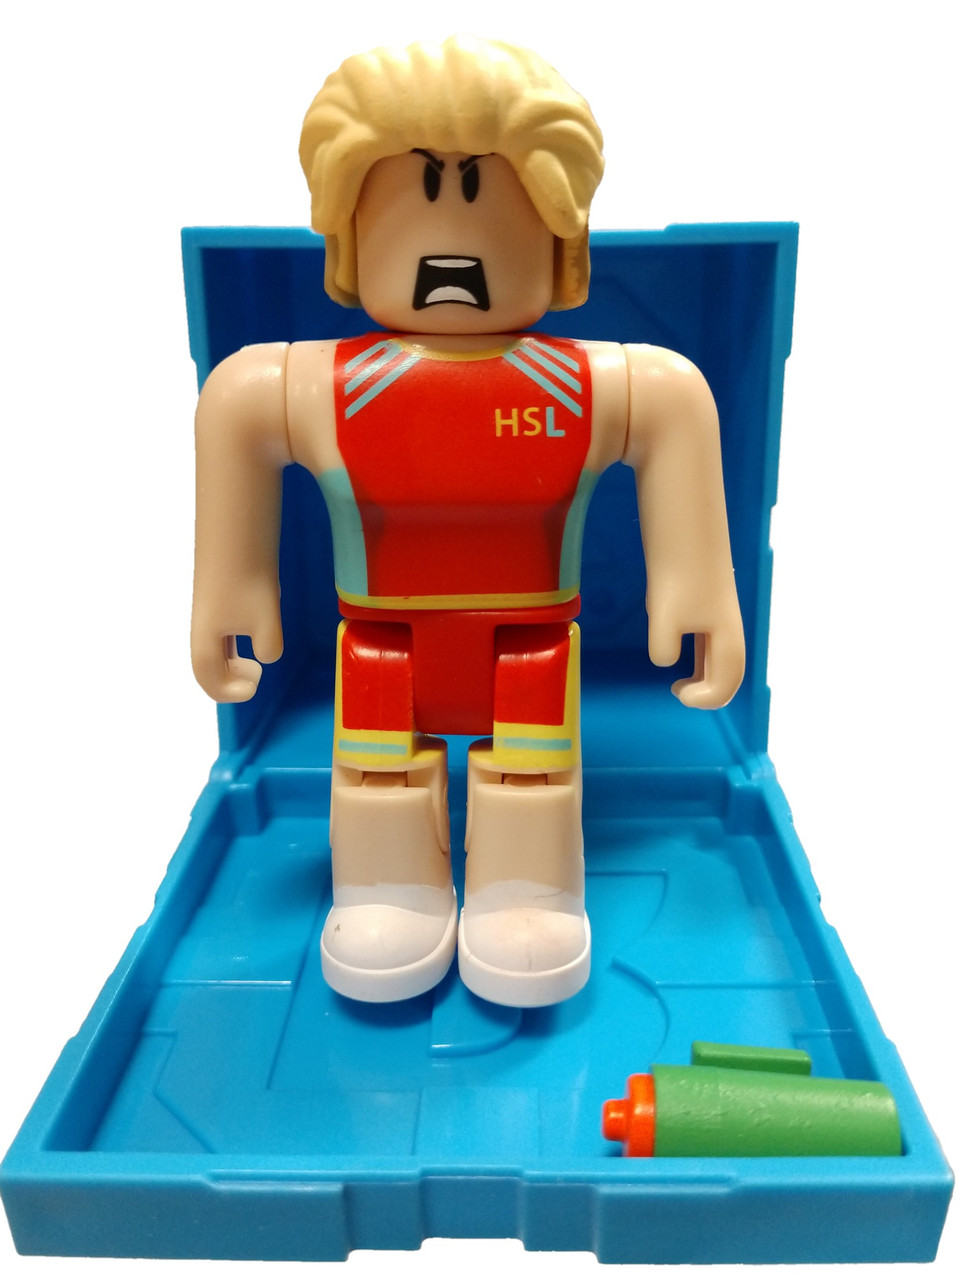 Roblox Series 9 High School Life Sprinter Boy 3 Mini Figure With Cube And Online Code Loose Jazwares Toywiz - roblox high school theme roblox id